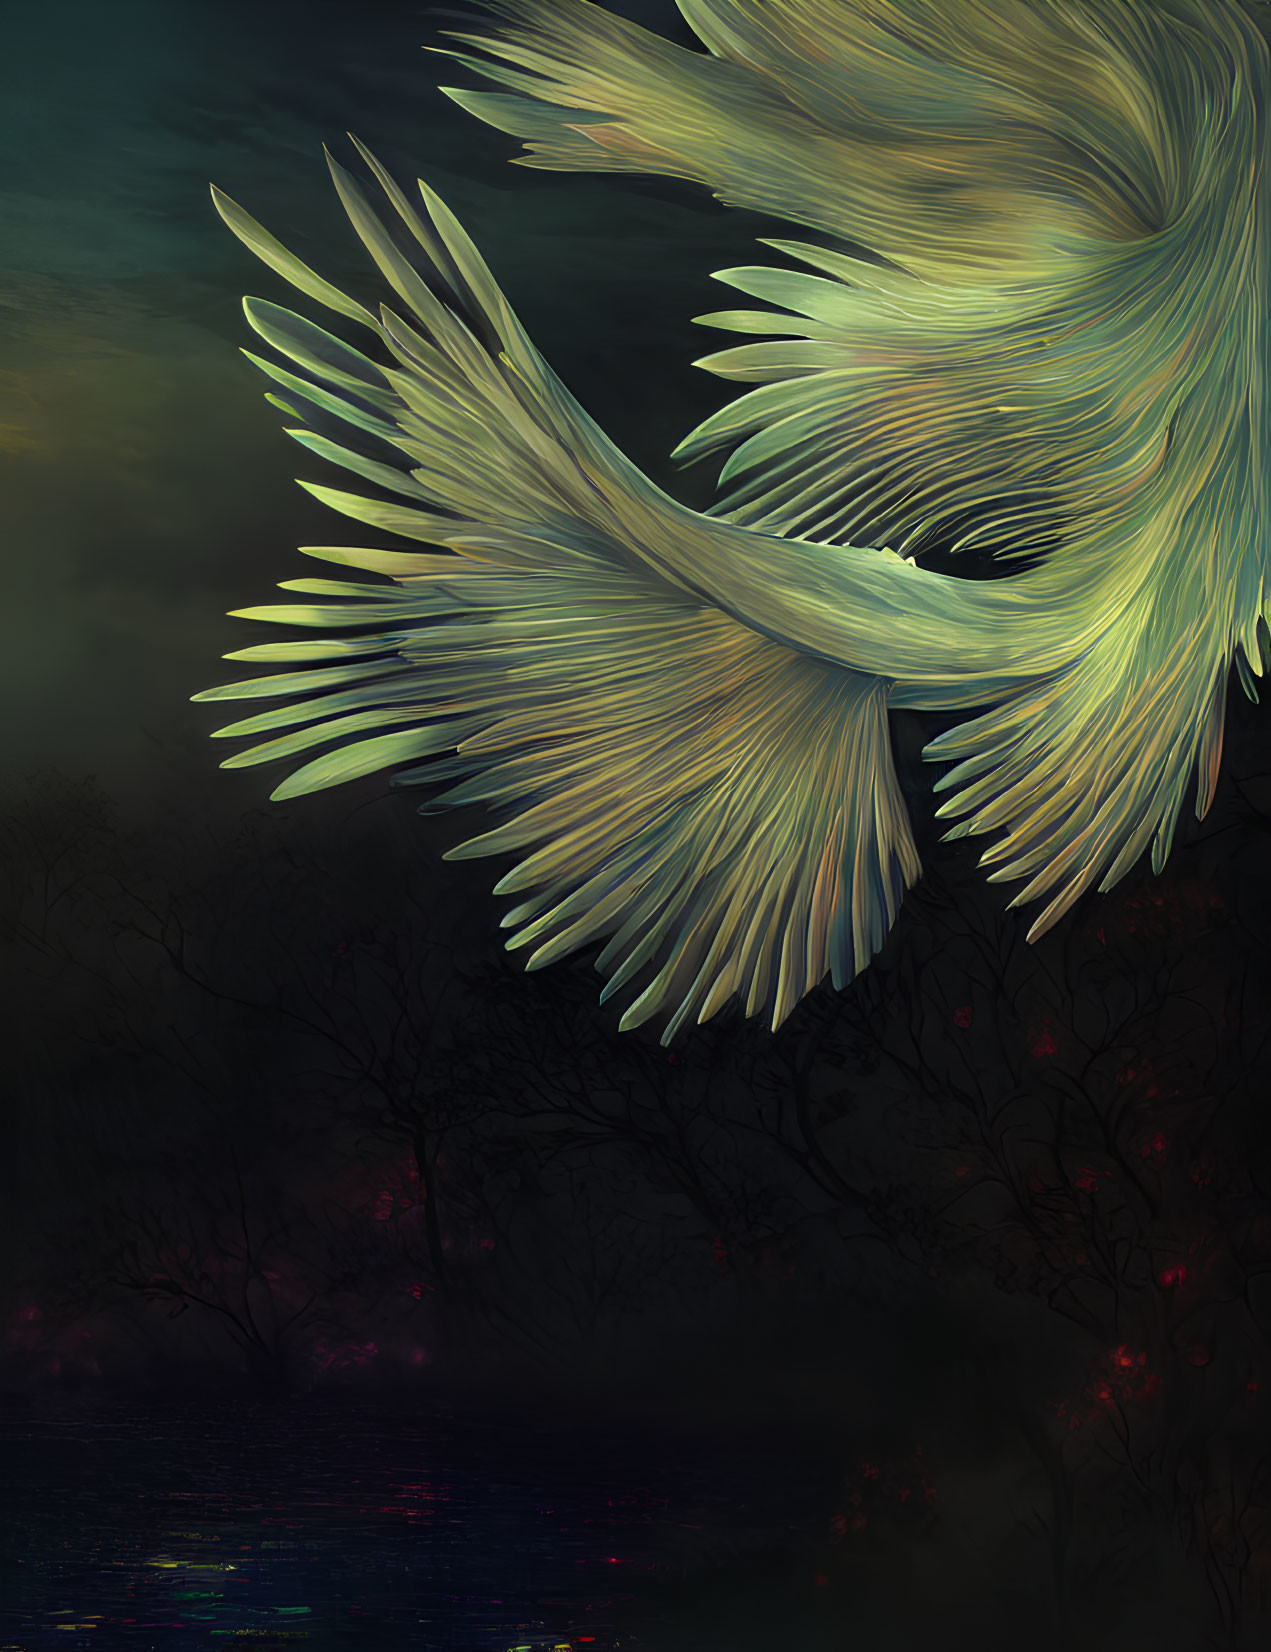 Angelic wings glowing in dark forest with red lights and reflective water